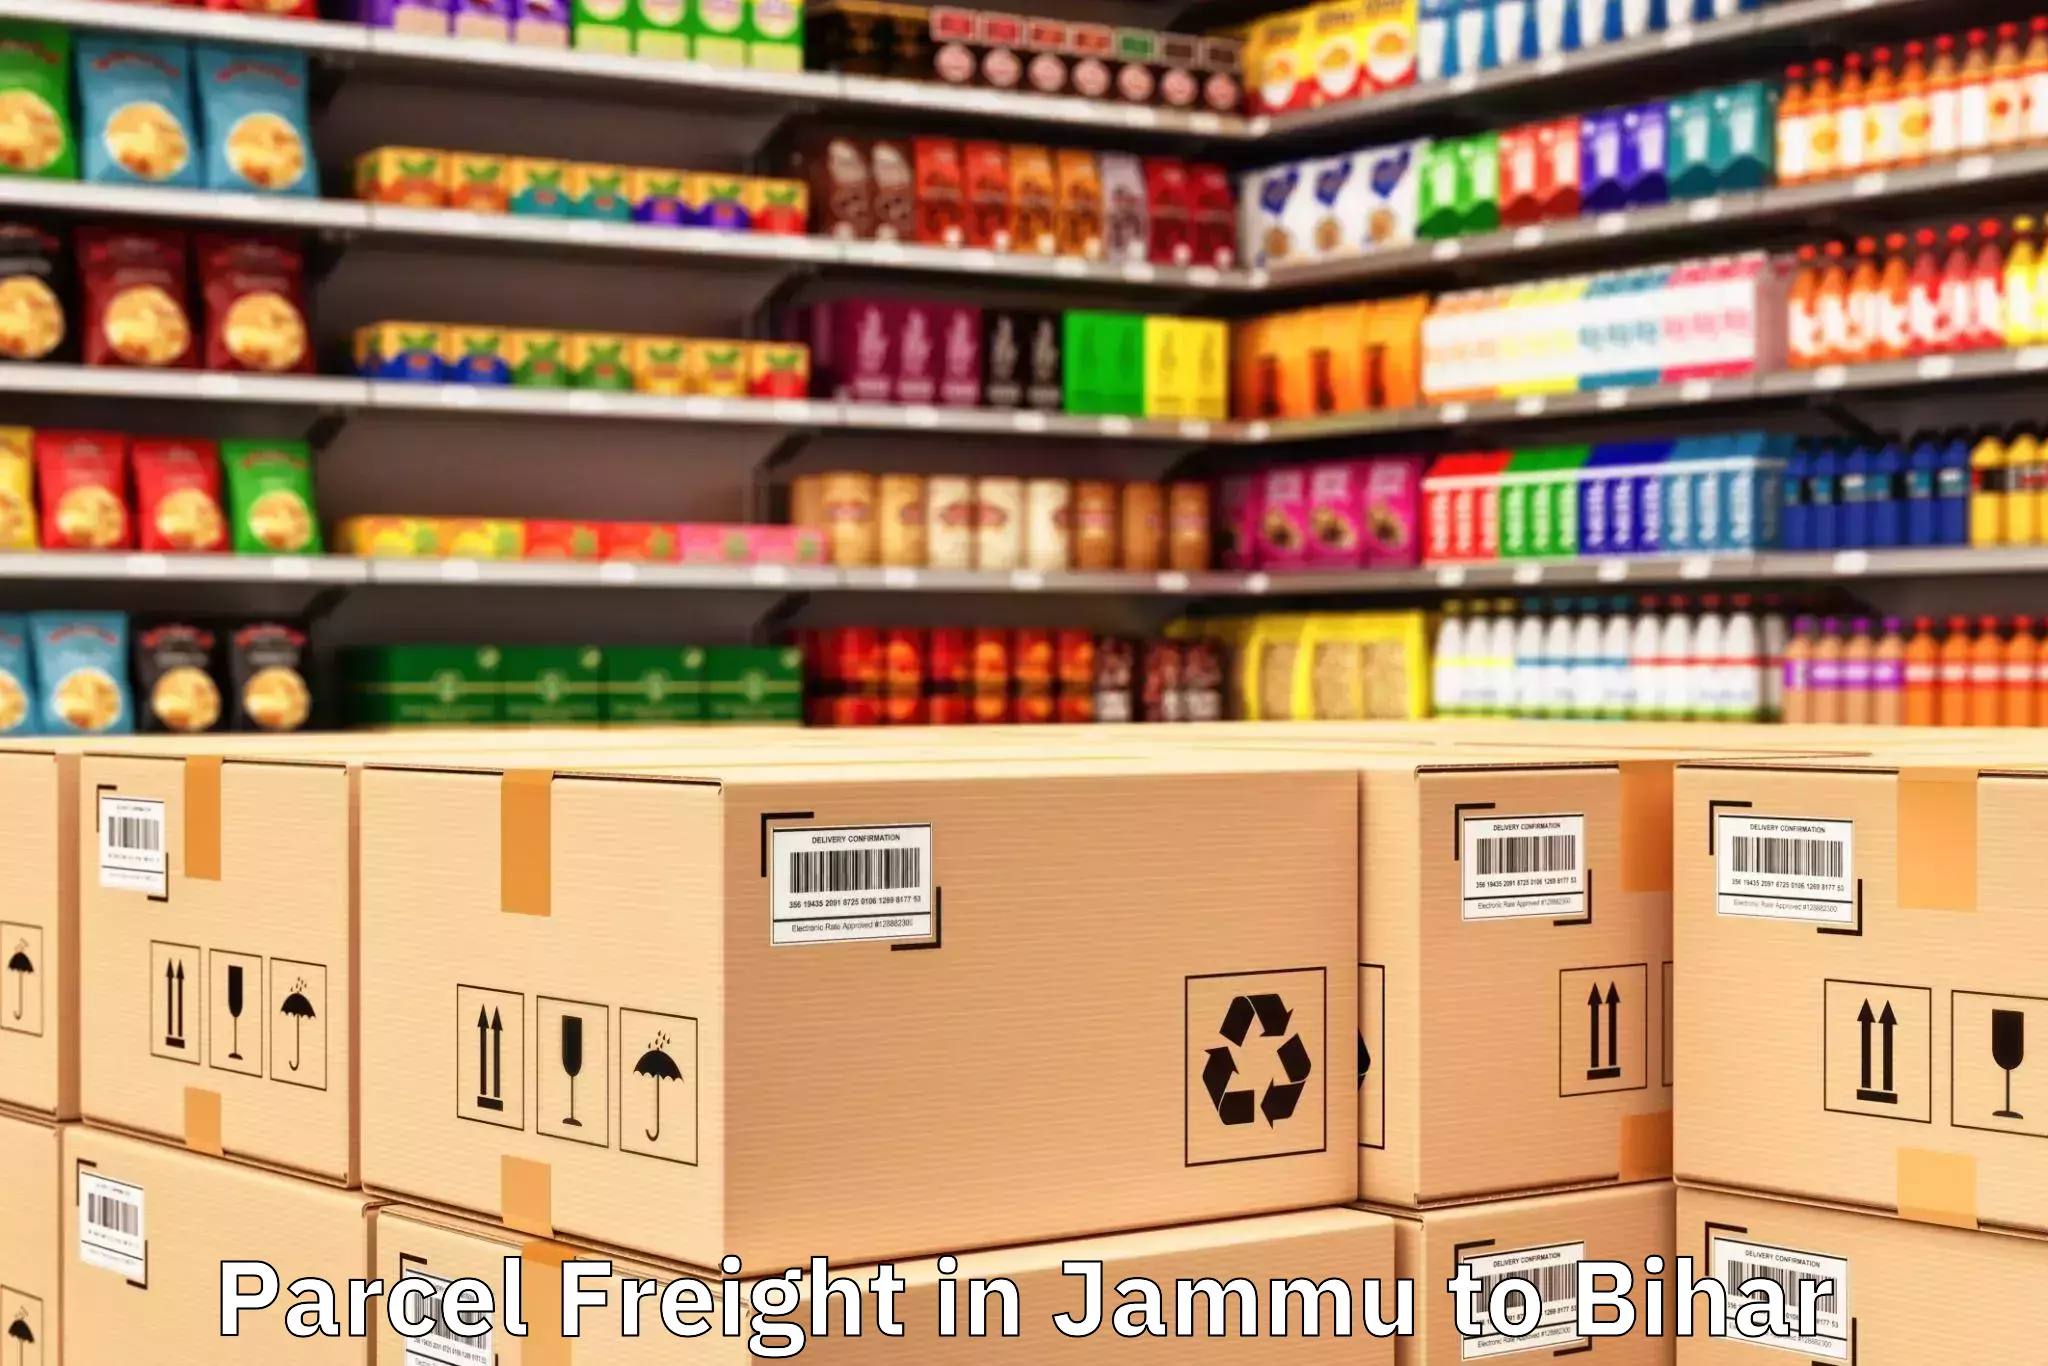 Professional Jammu to Roh Parcel Freight